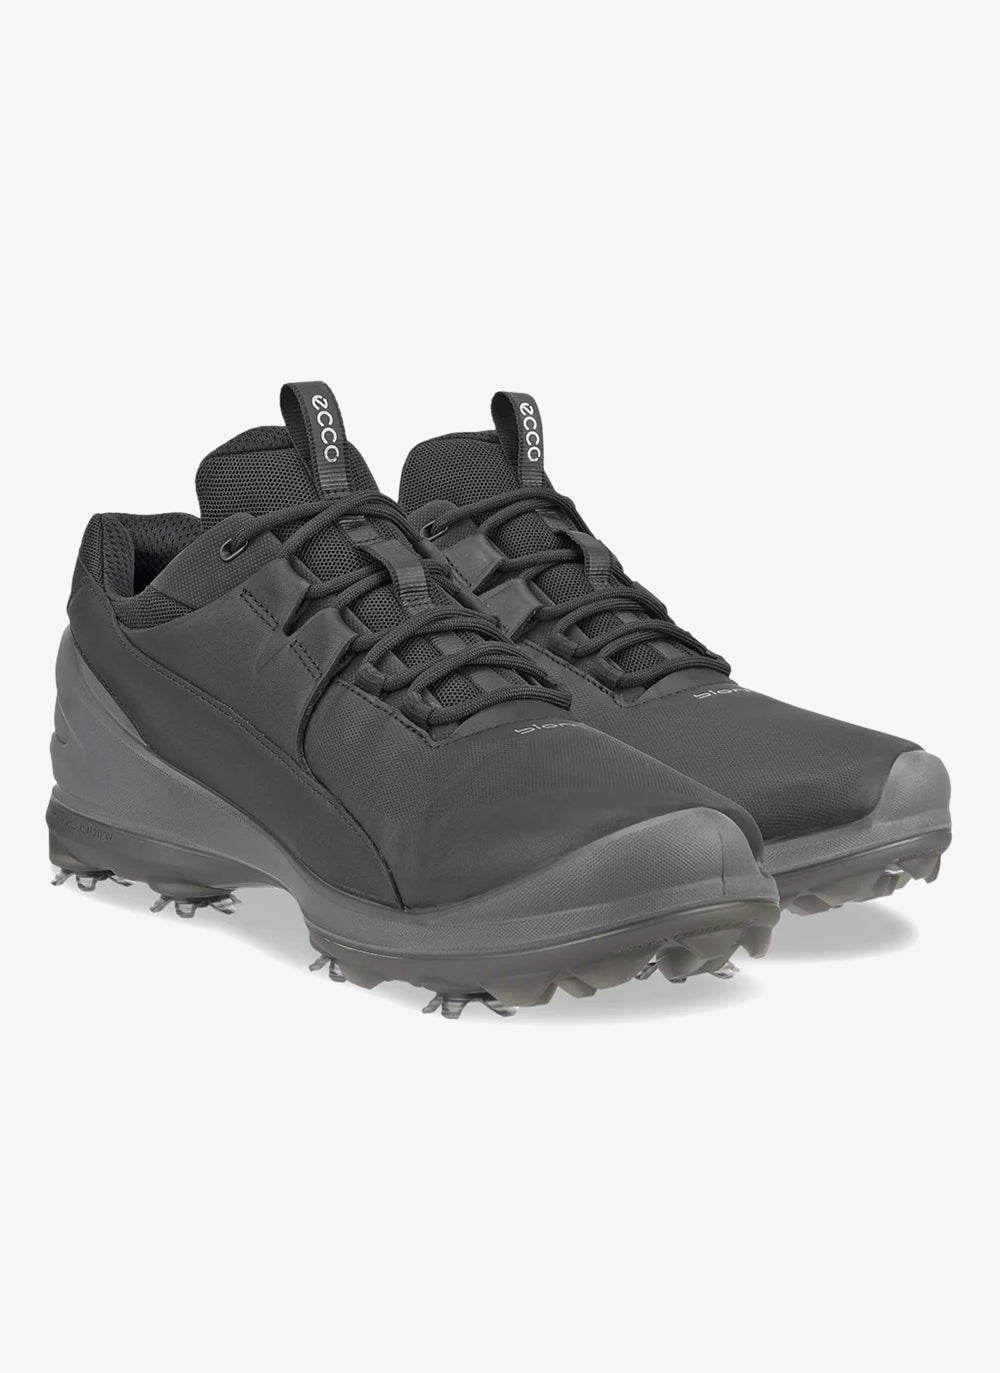 Ecco Biom Tour Spiked Golf Shoes 131904